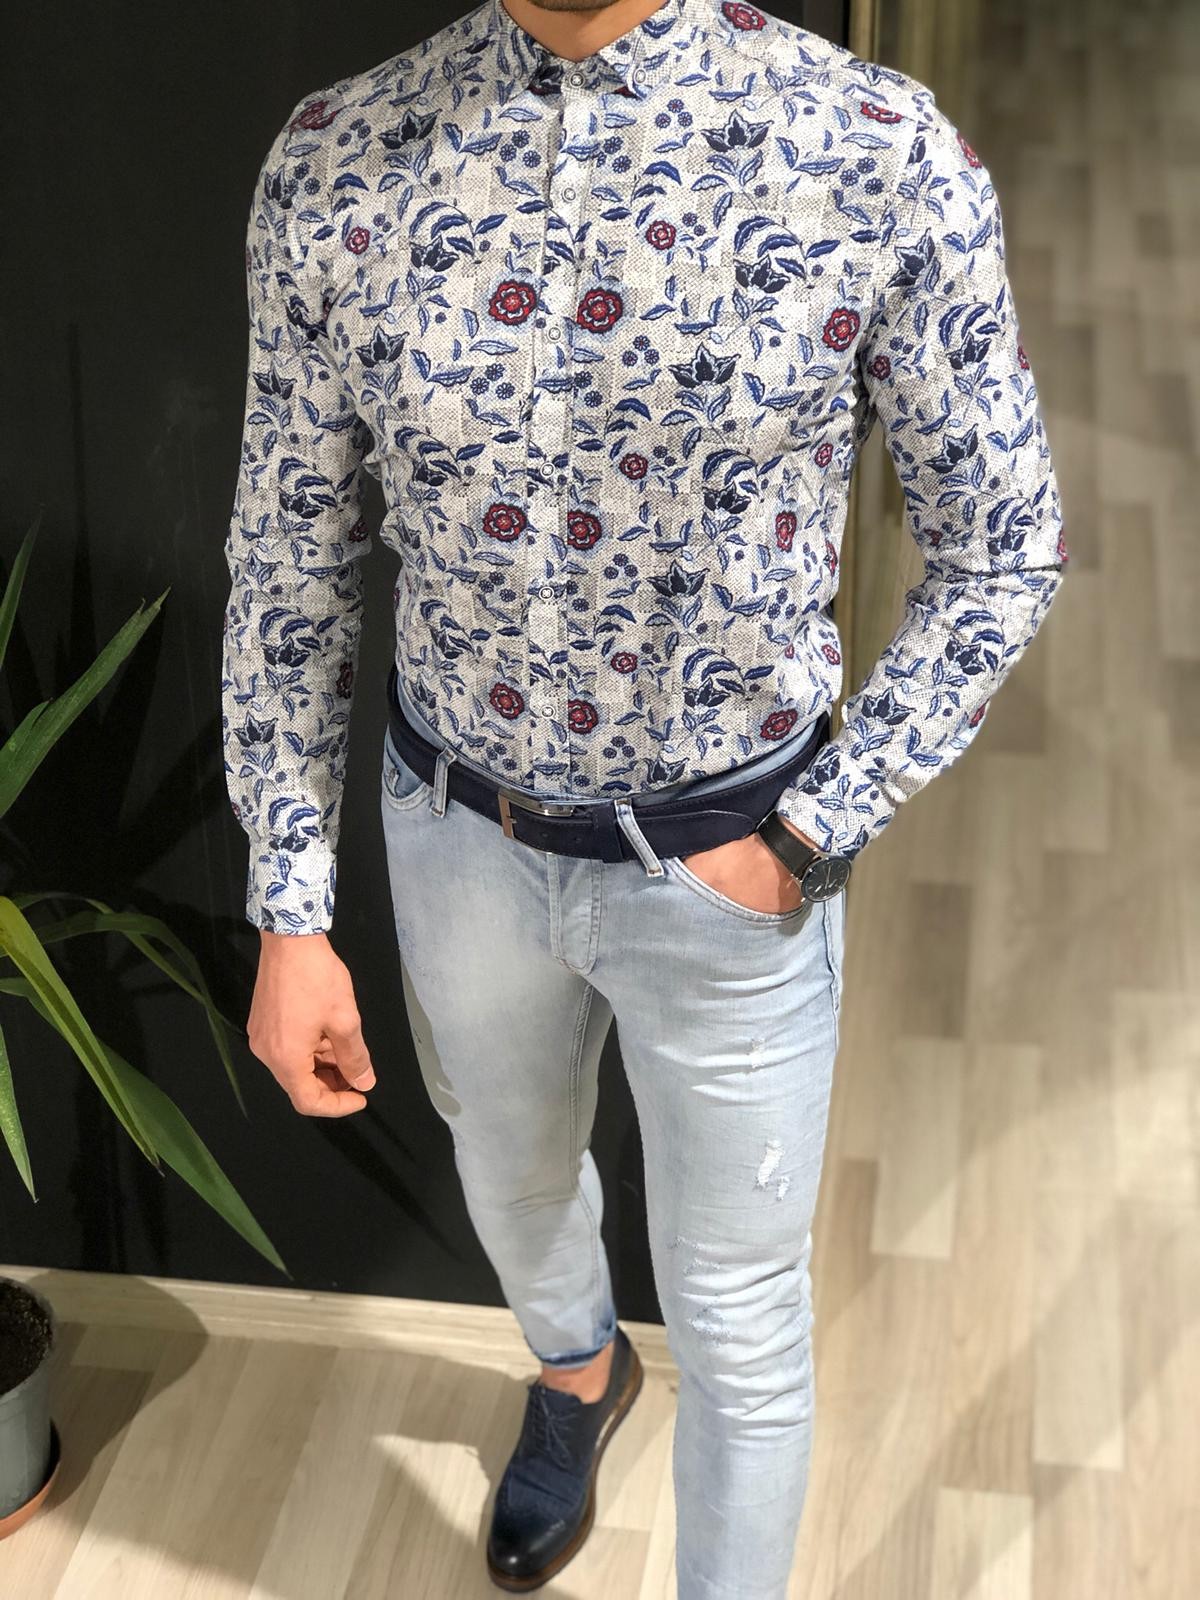 Buy White Slim Fit Floral Shirt by Gentwith.com with Free Shipping